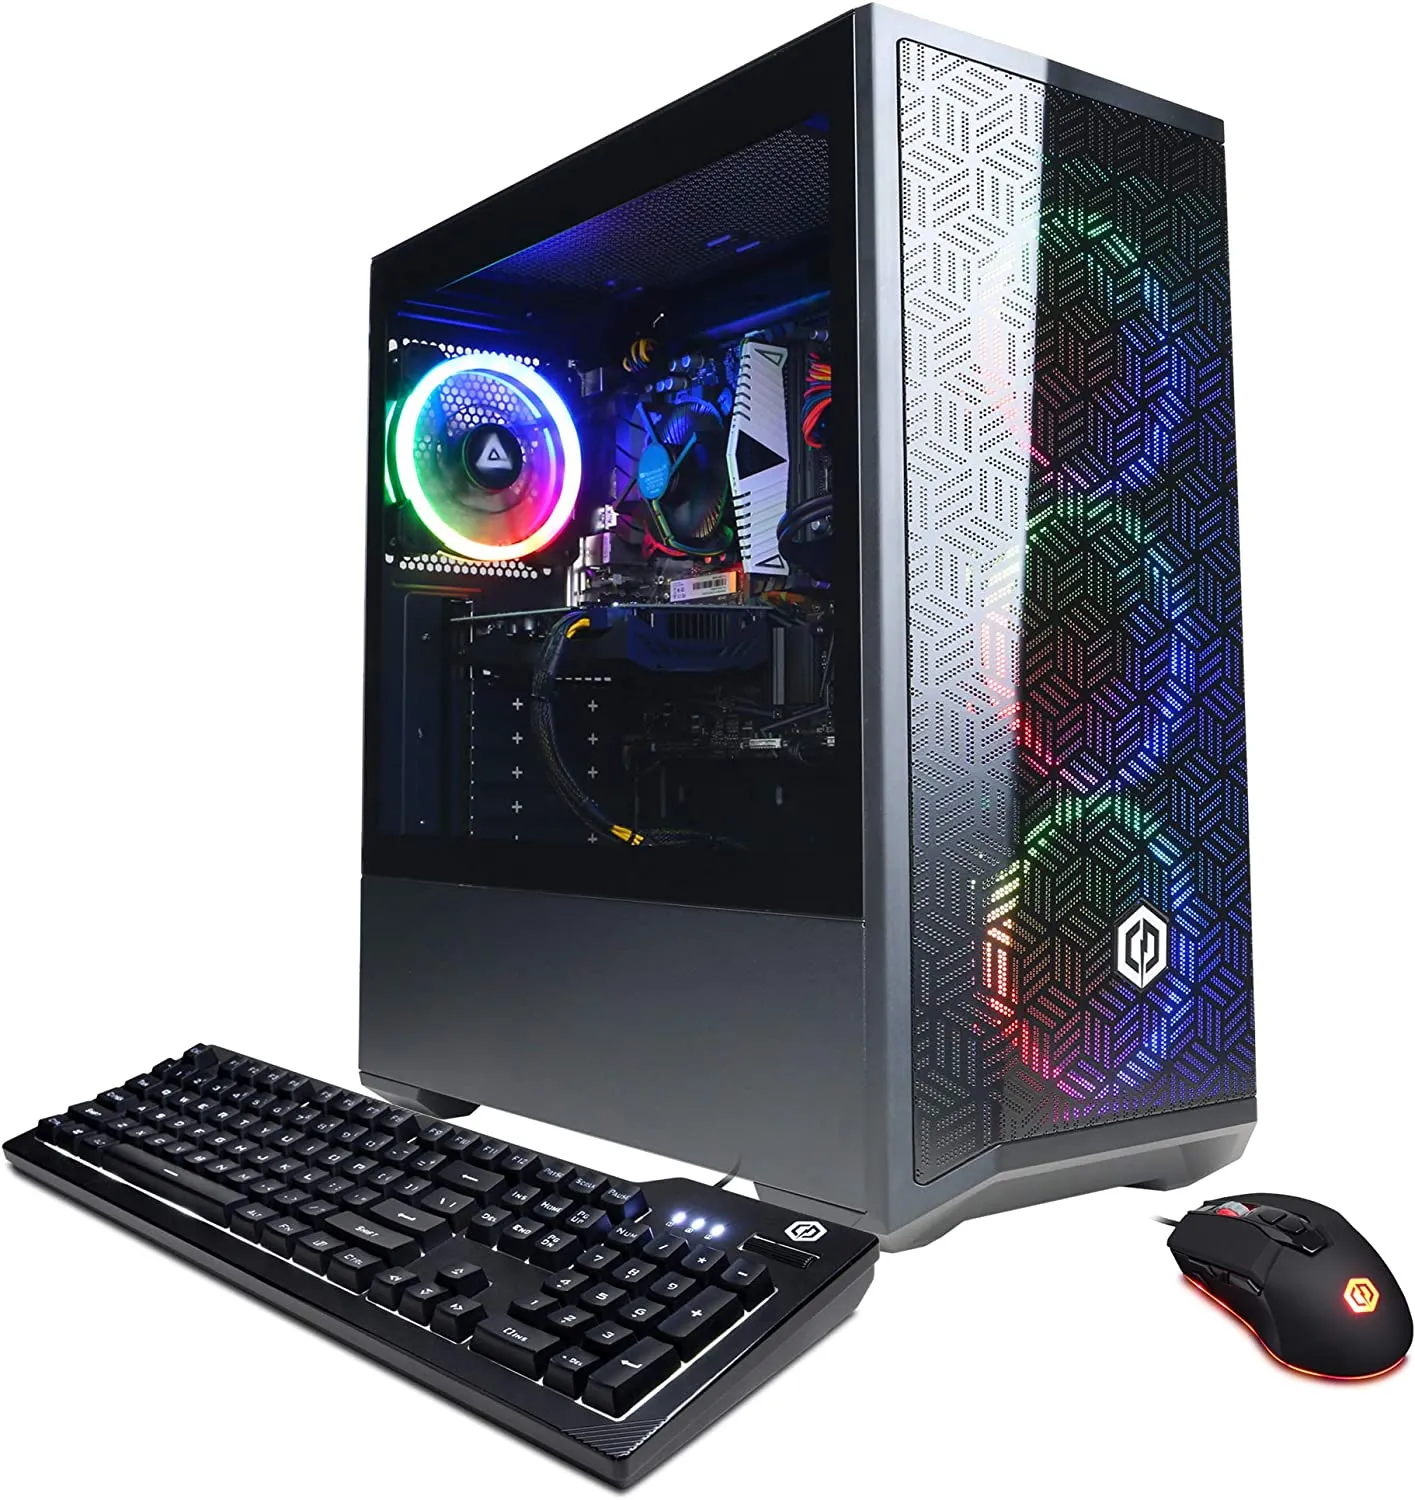 Cyberpower PC Gamer Xtreme VR Fully Build PC